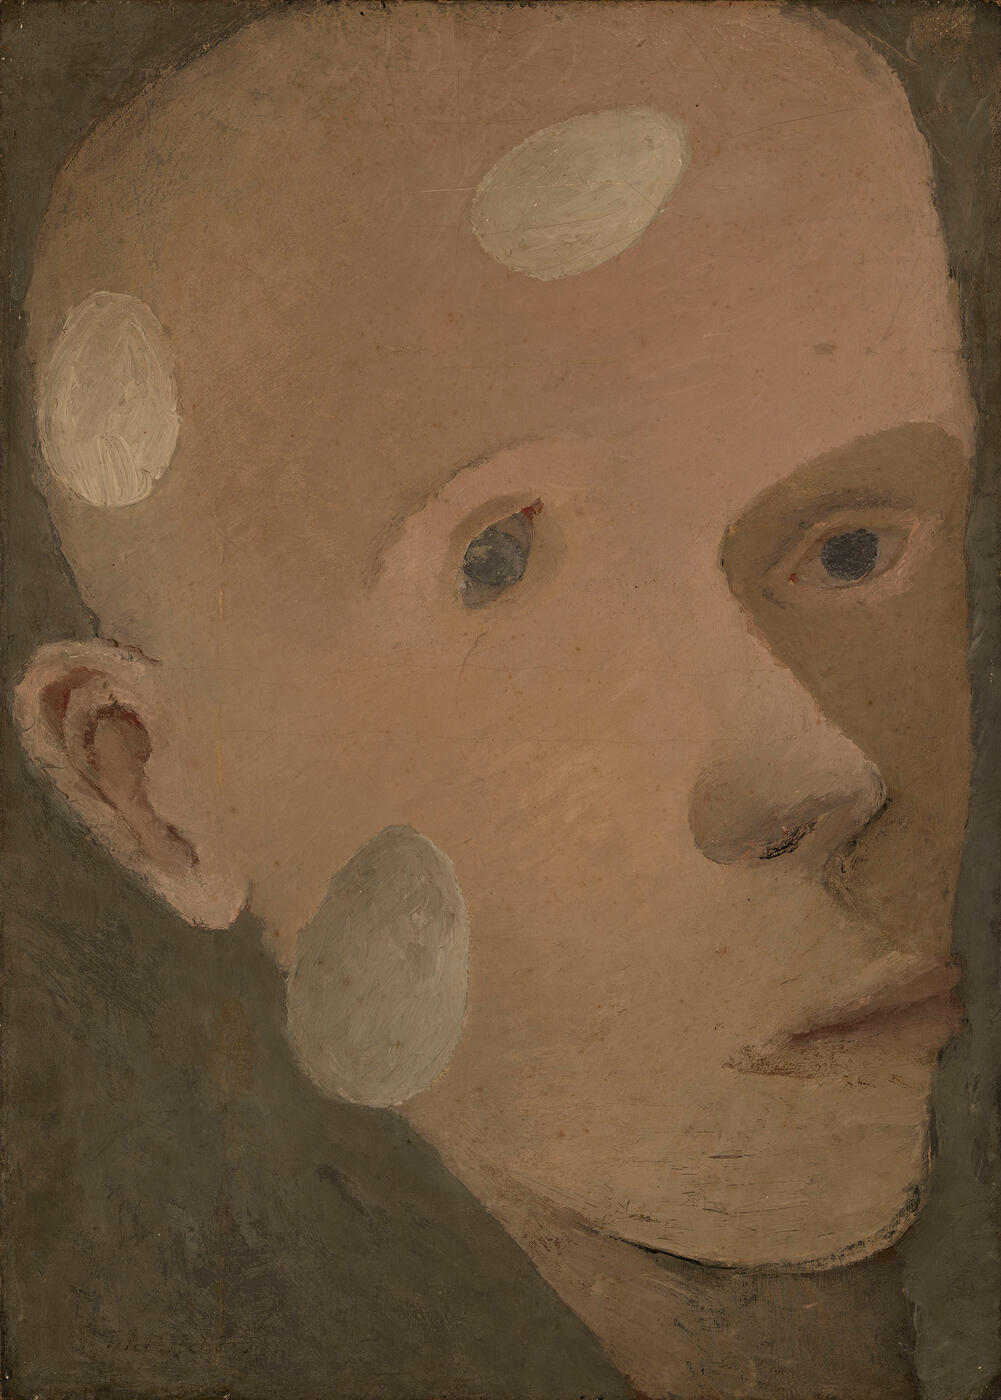 Head of a Young Boy with Floating Eggs